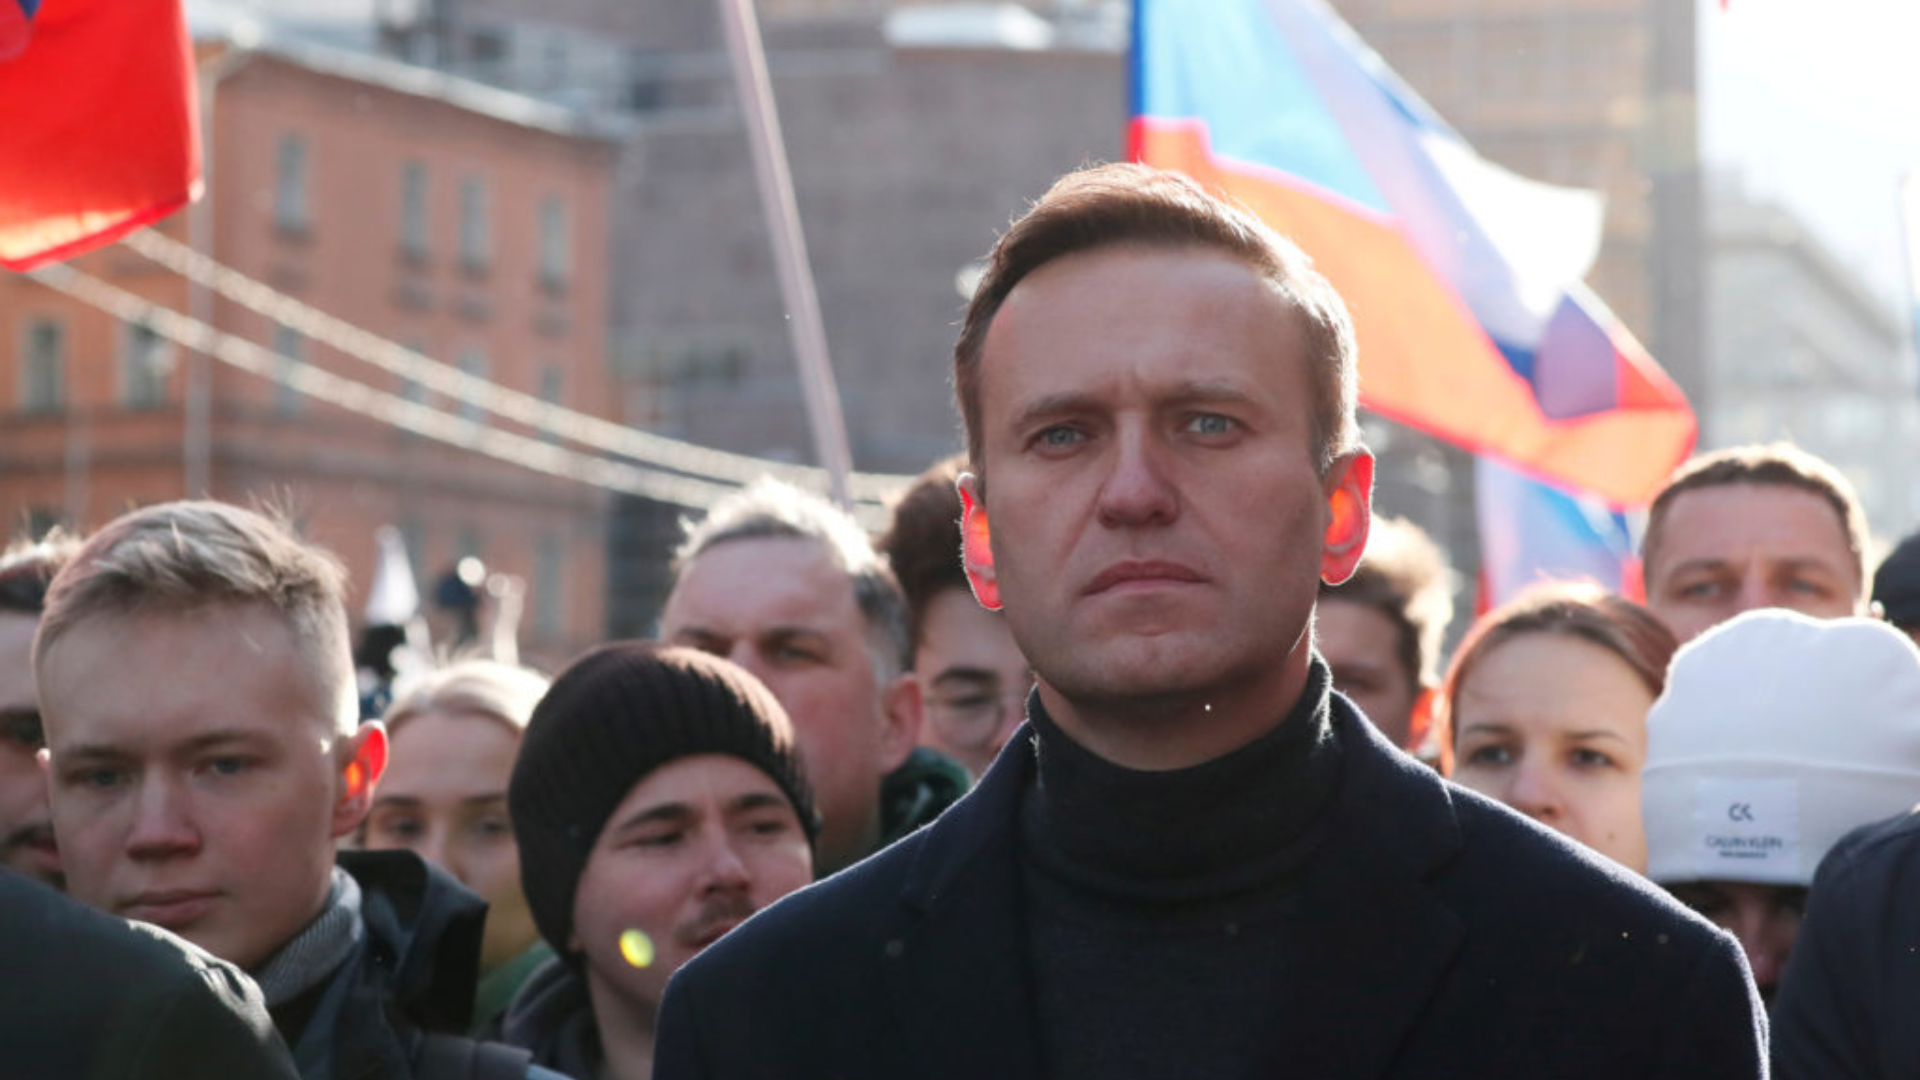 UK calls Russian embassy, holds them accountable for Navalny’s demise.